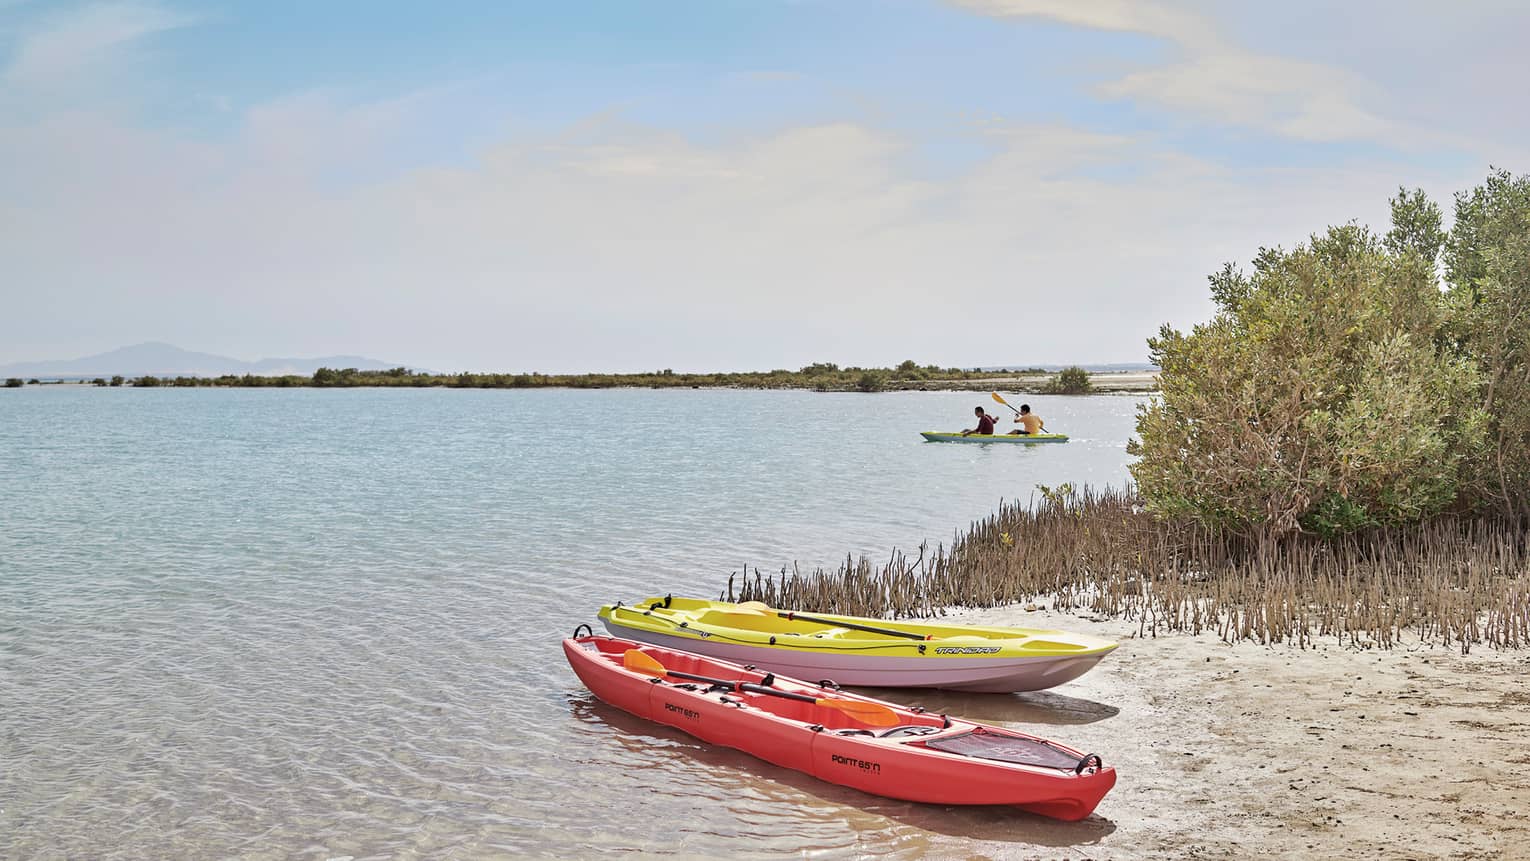 Two beached kayaks – one red, one yellow – amid grass and shrubs; two people paddling in a tandem kayak in the distance.